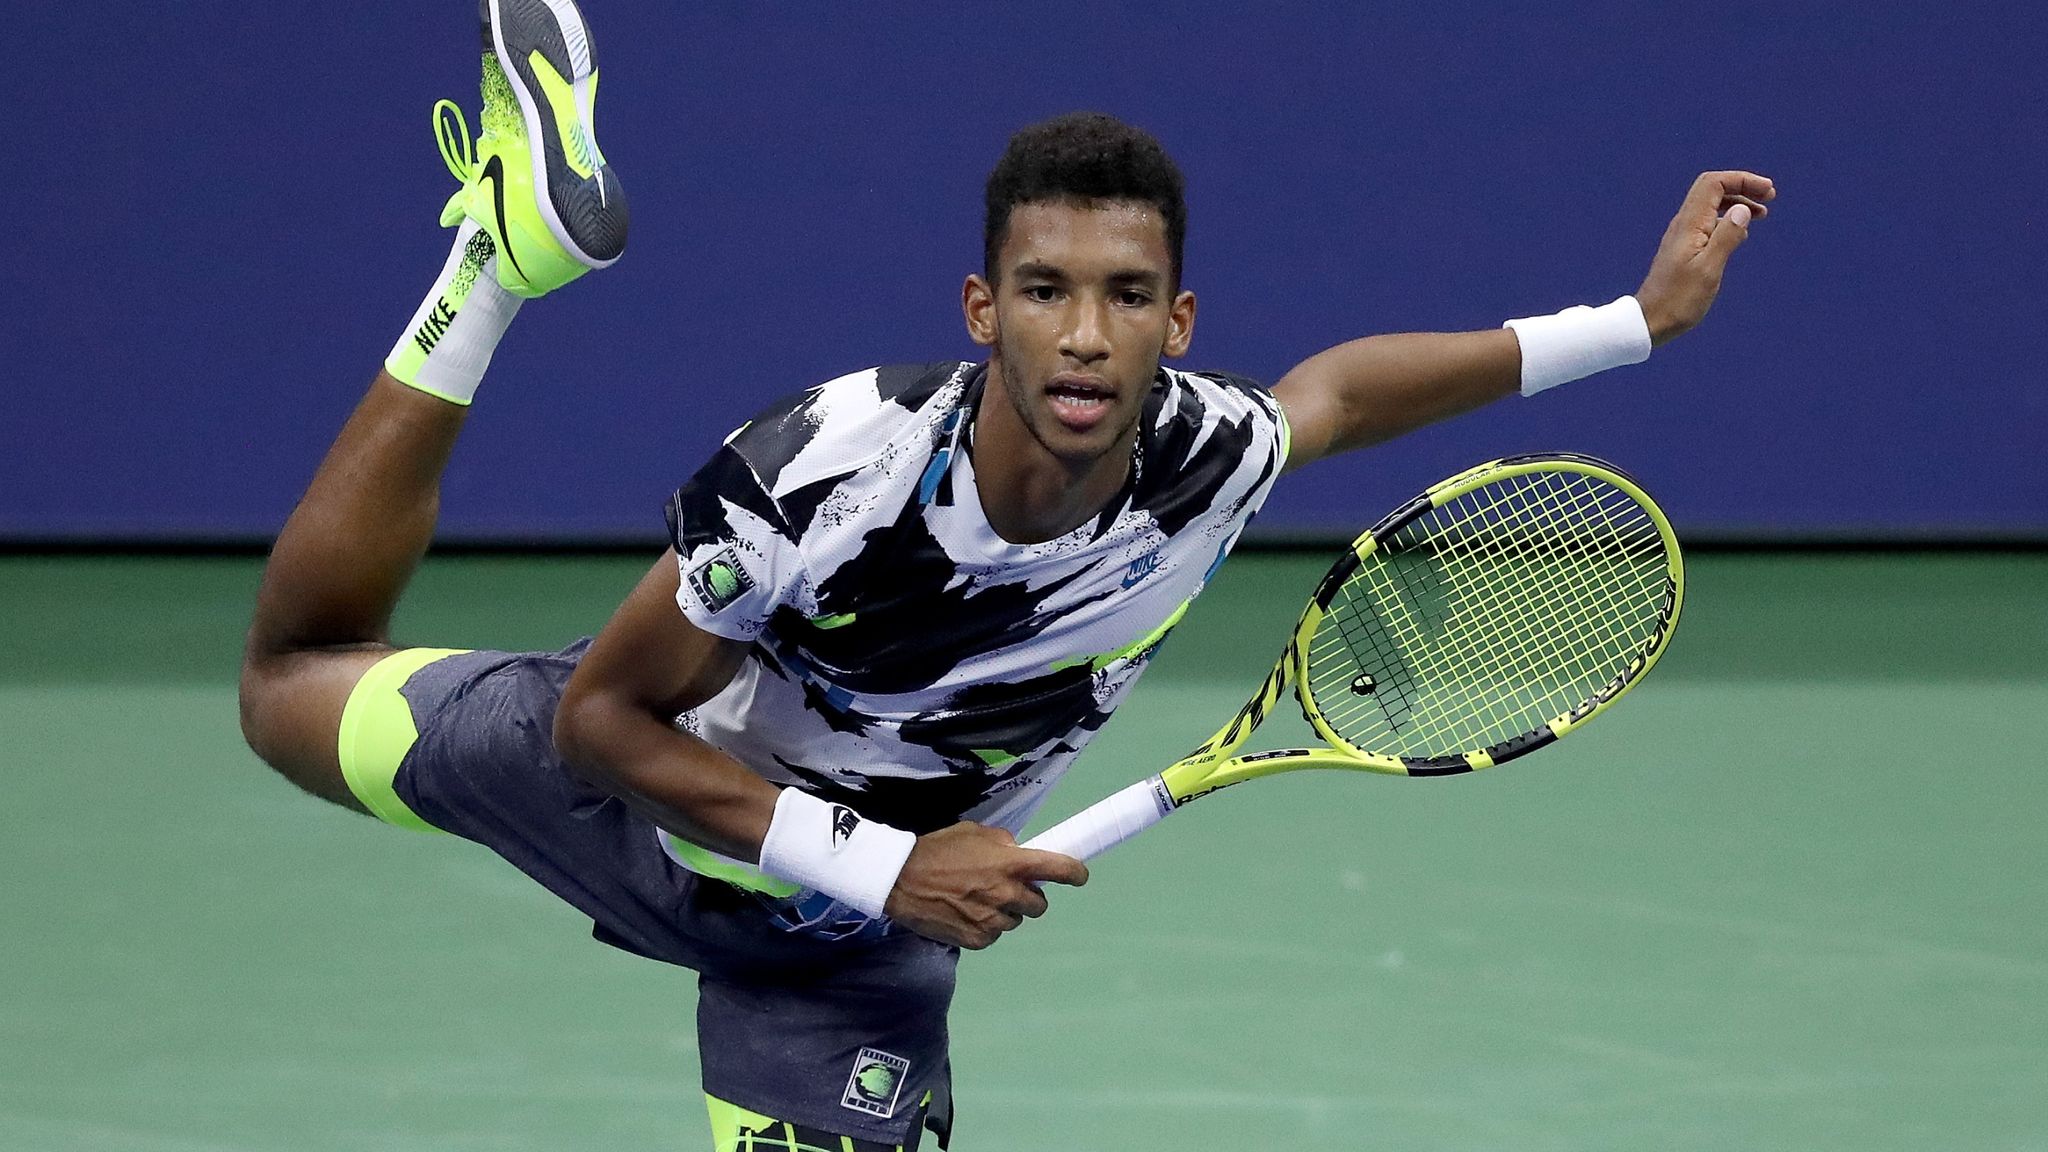 US Open: Felix Auger-Aliassime happy to see different ethnicities and  backgrounds at Grand Slams | Tennis News | Sky Sports